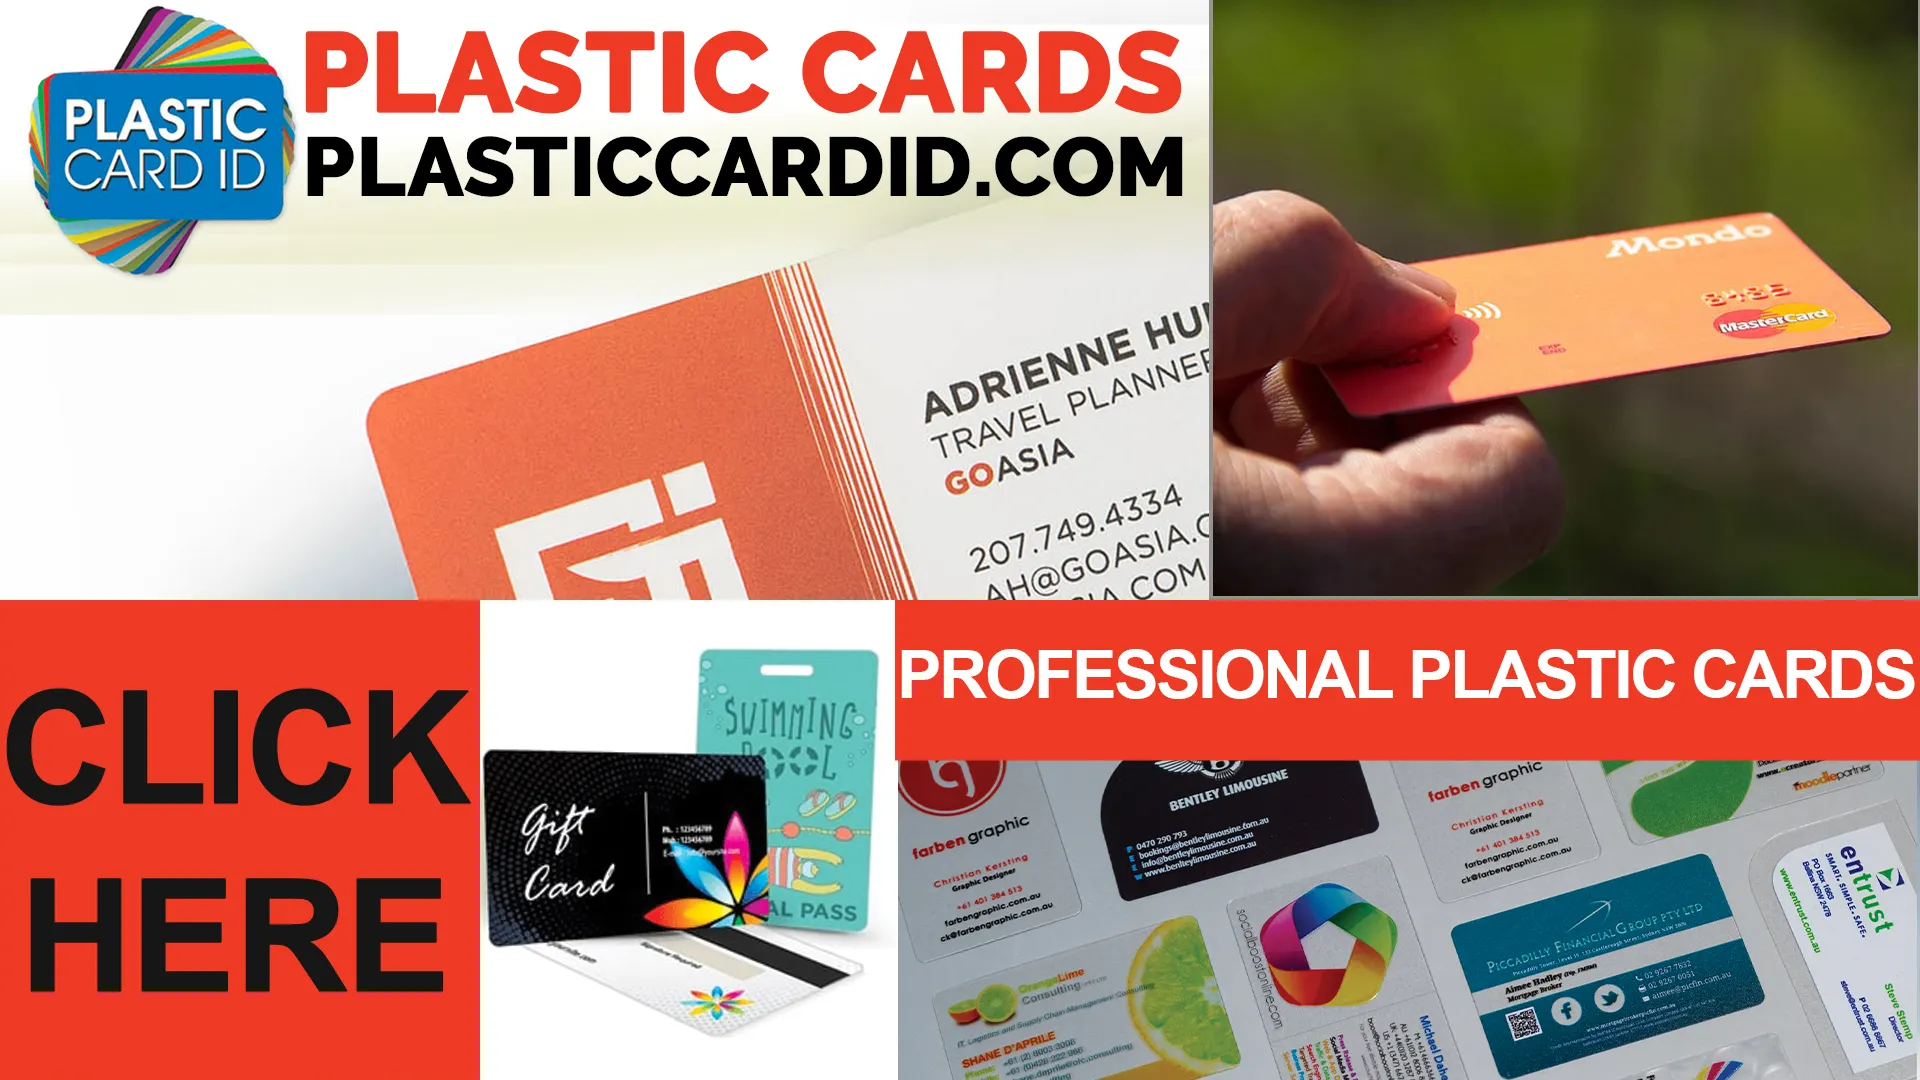 Finding the Perfect Printers and Supplies for Your Plastic Cards